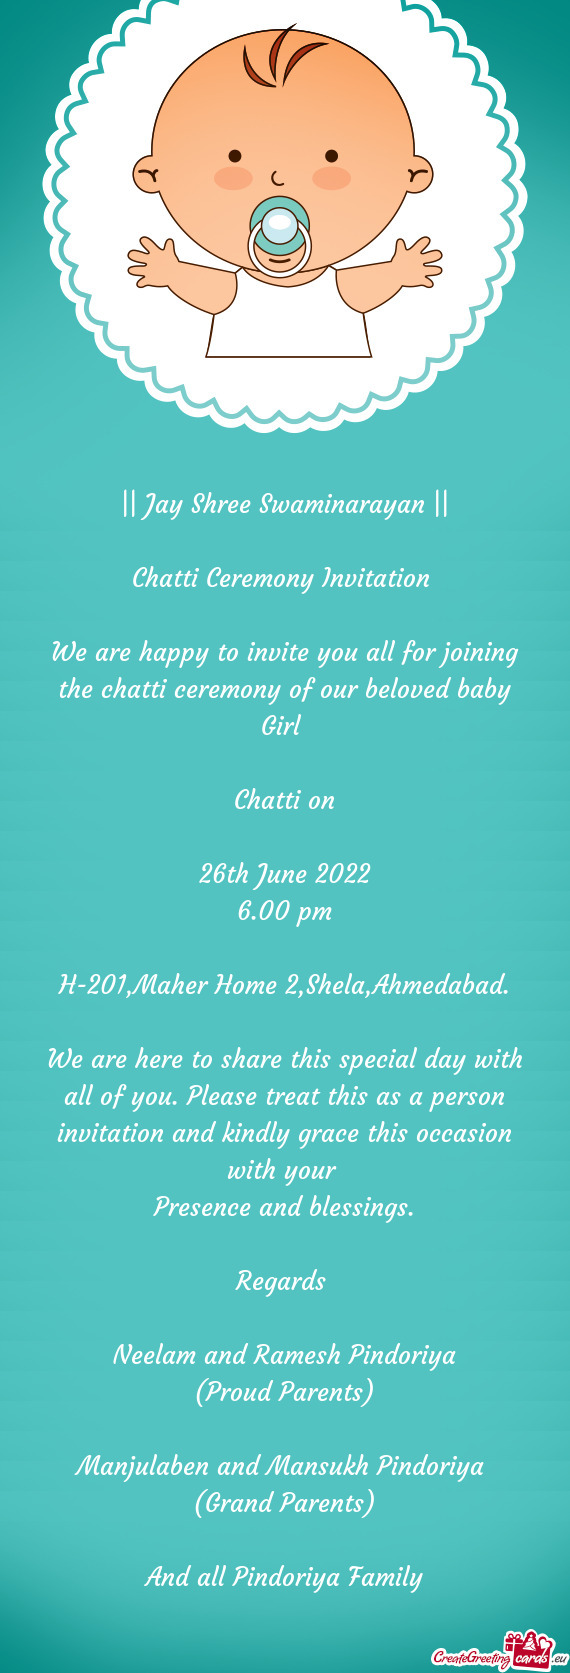 We are here to share this special day with all of you. Please treat this as a person invitation and